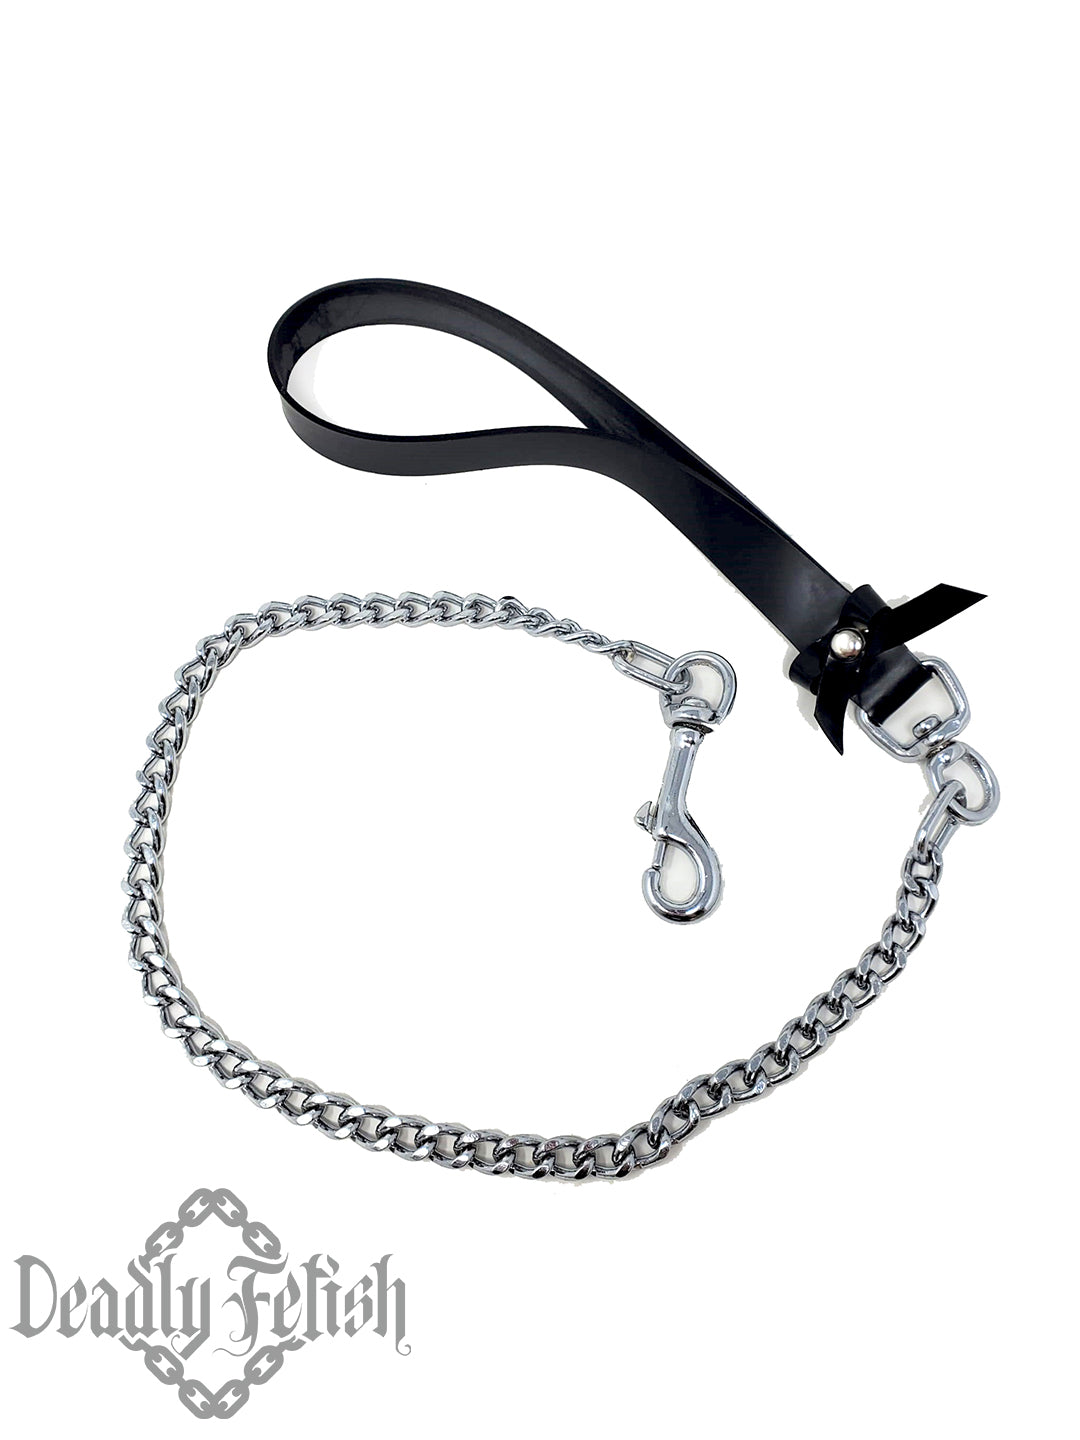 Deadly Fetish Latex: Latex Bow and Chain Leash